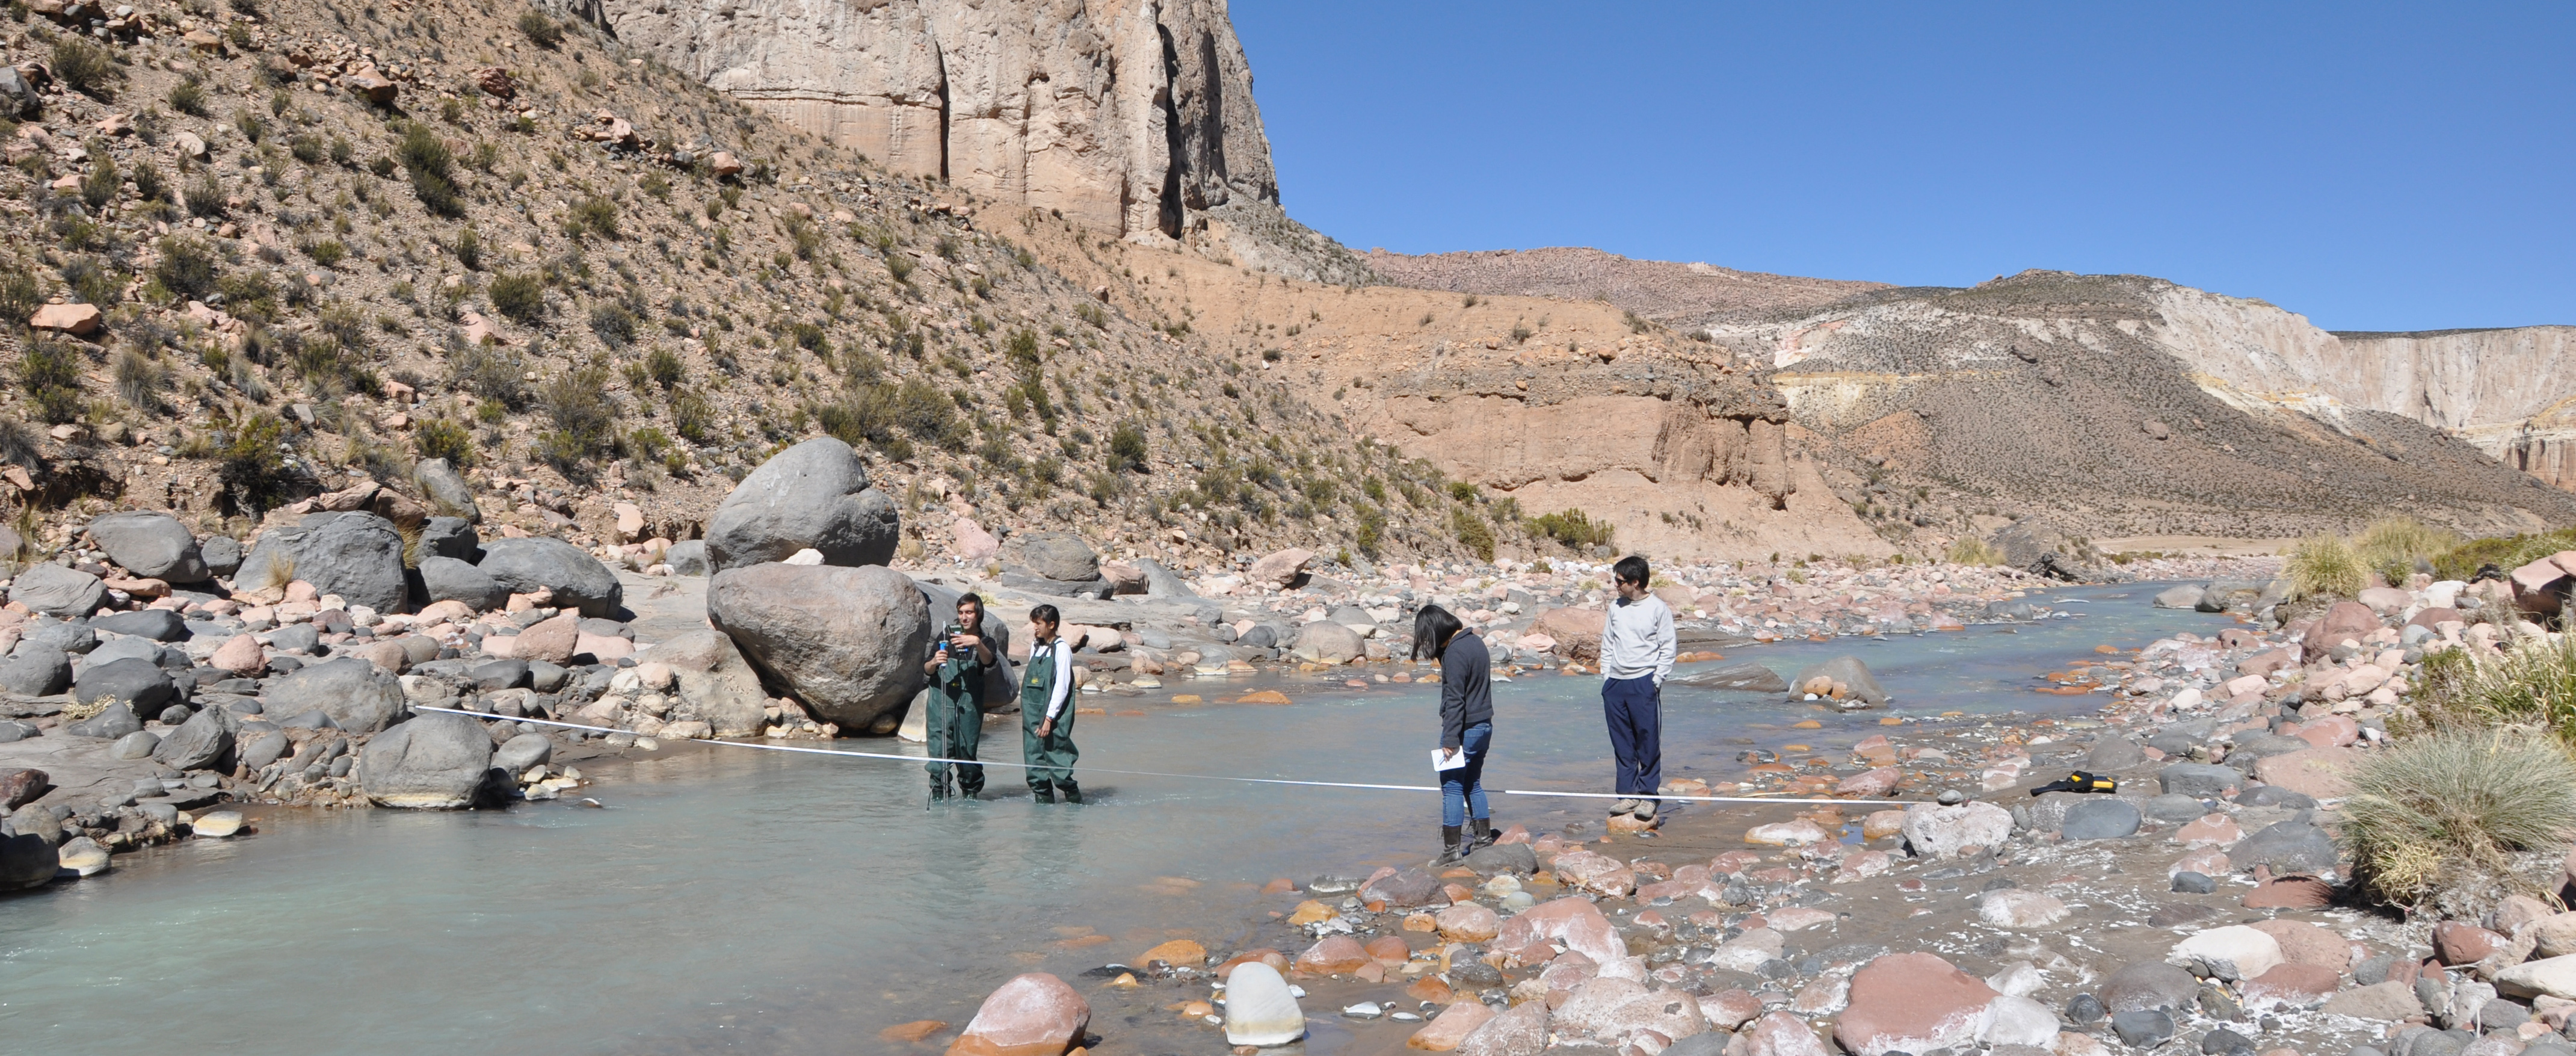 Students from Engineers for a Sustainable World check the water in the Lluta River Valley.